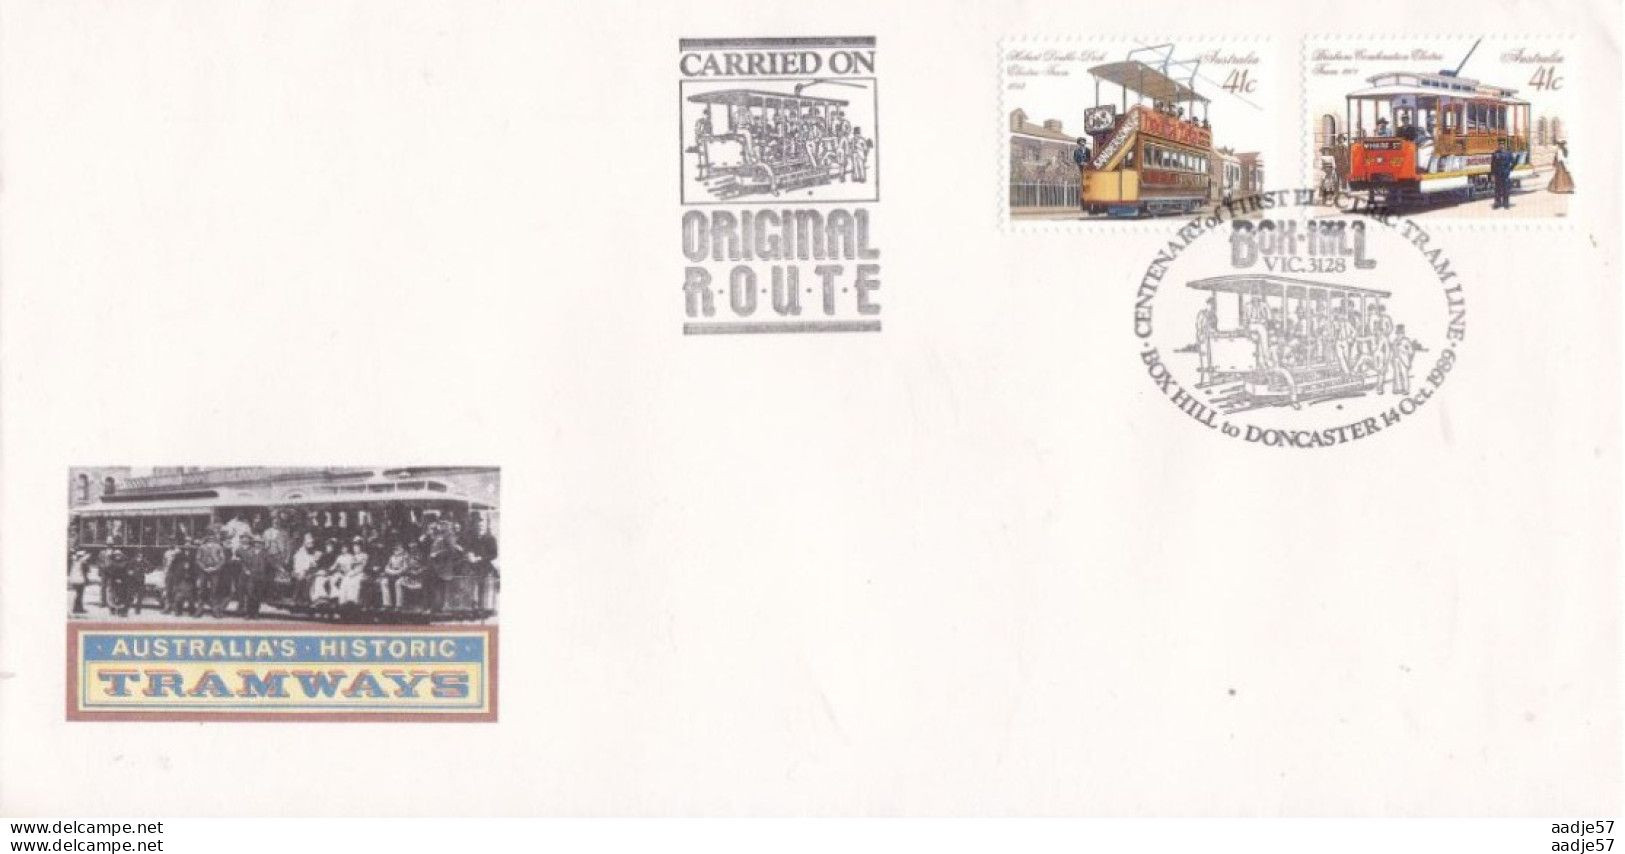 Australia FDC - 100 Year Electric Tram Line Carried On Original Route - Tram